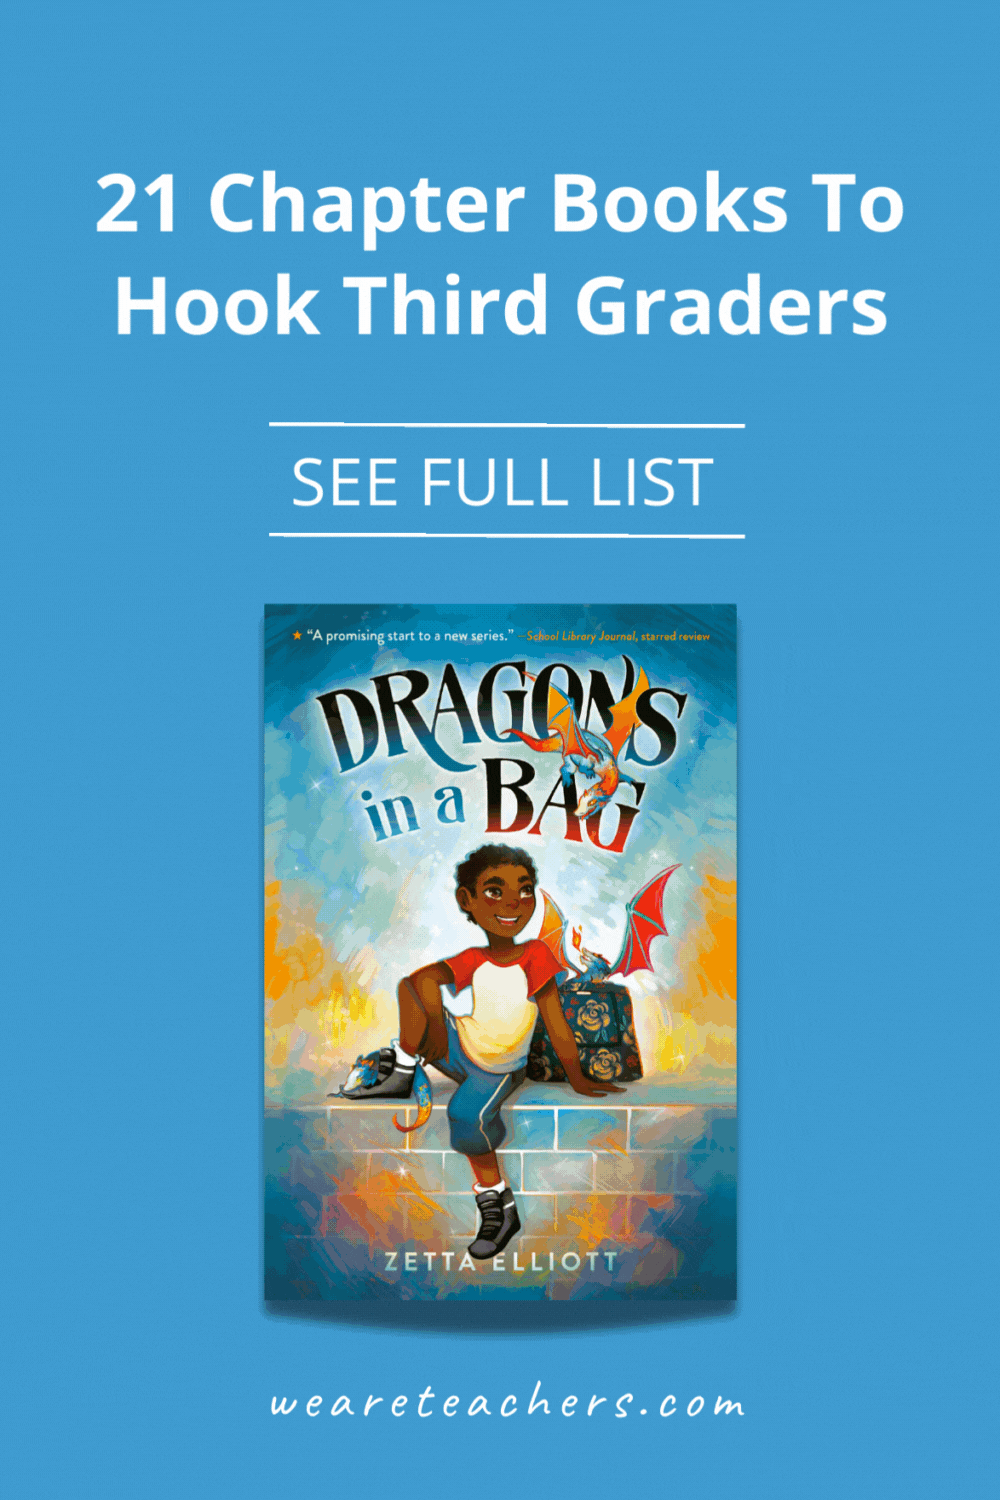 Check out this list to entertain and advance students' reading skills with quality chapter books for third graders.